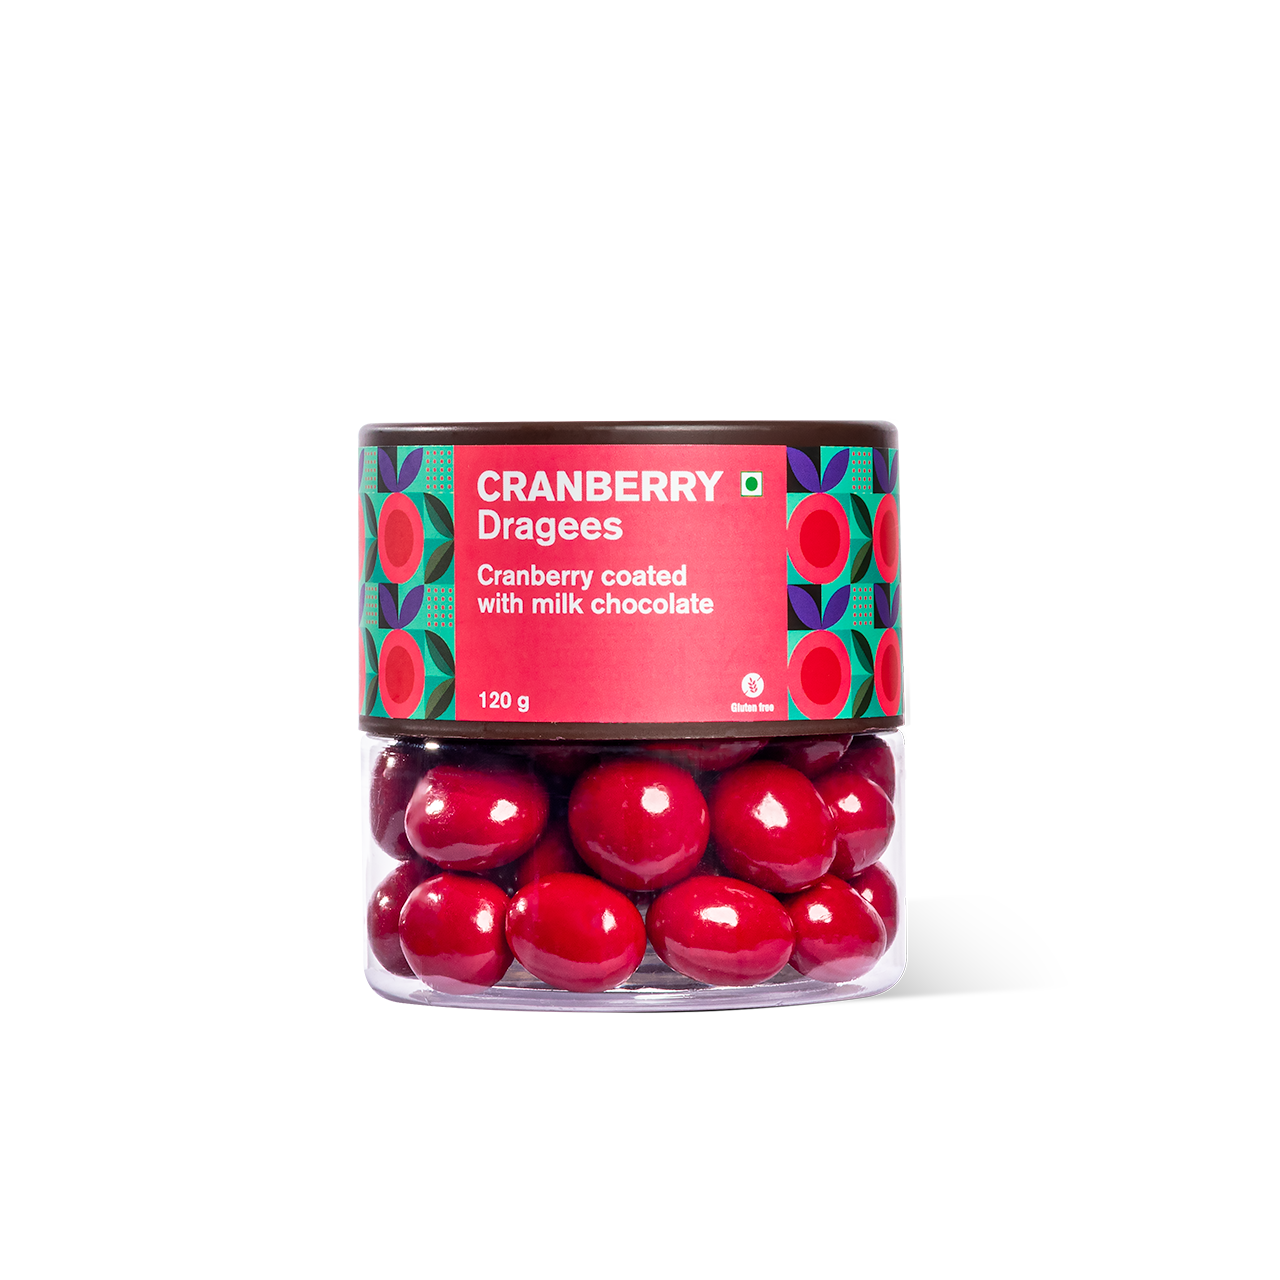 Entisi - Chocolate coated Cranberry Dragees Jar